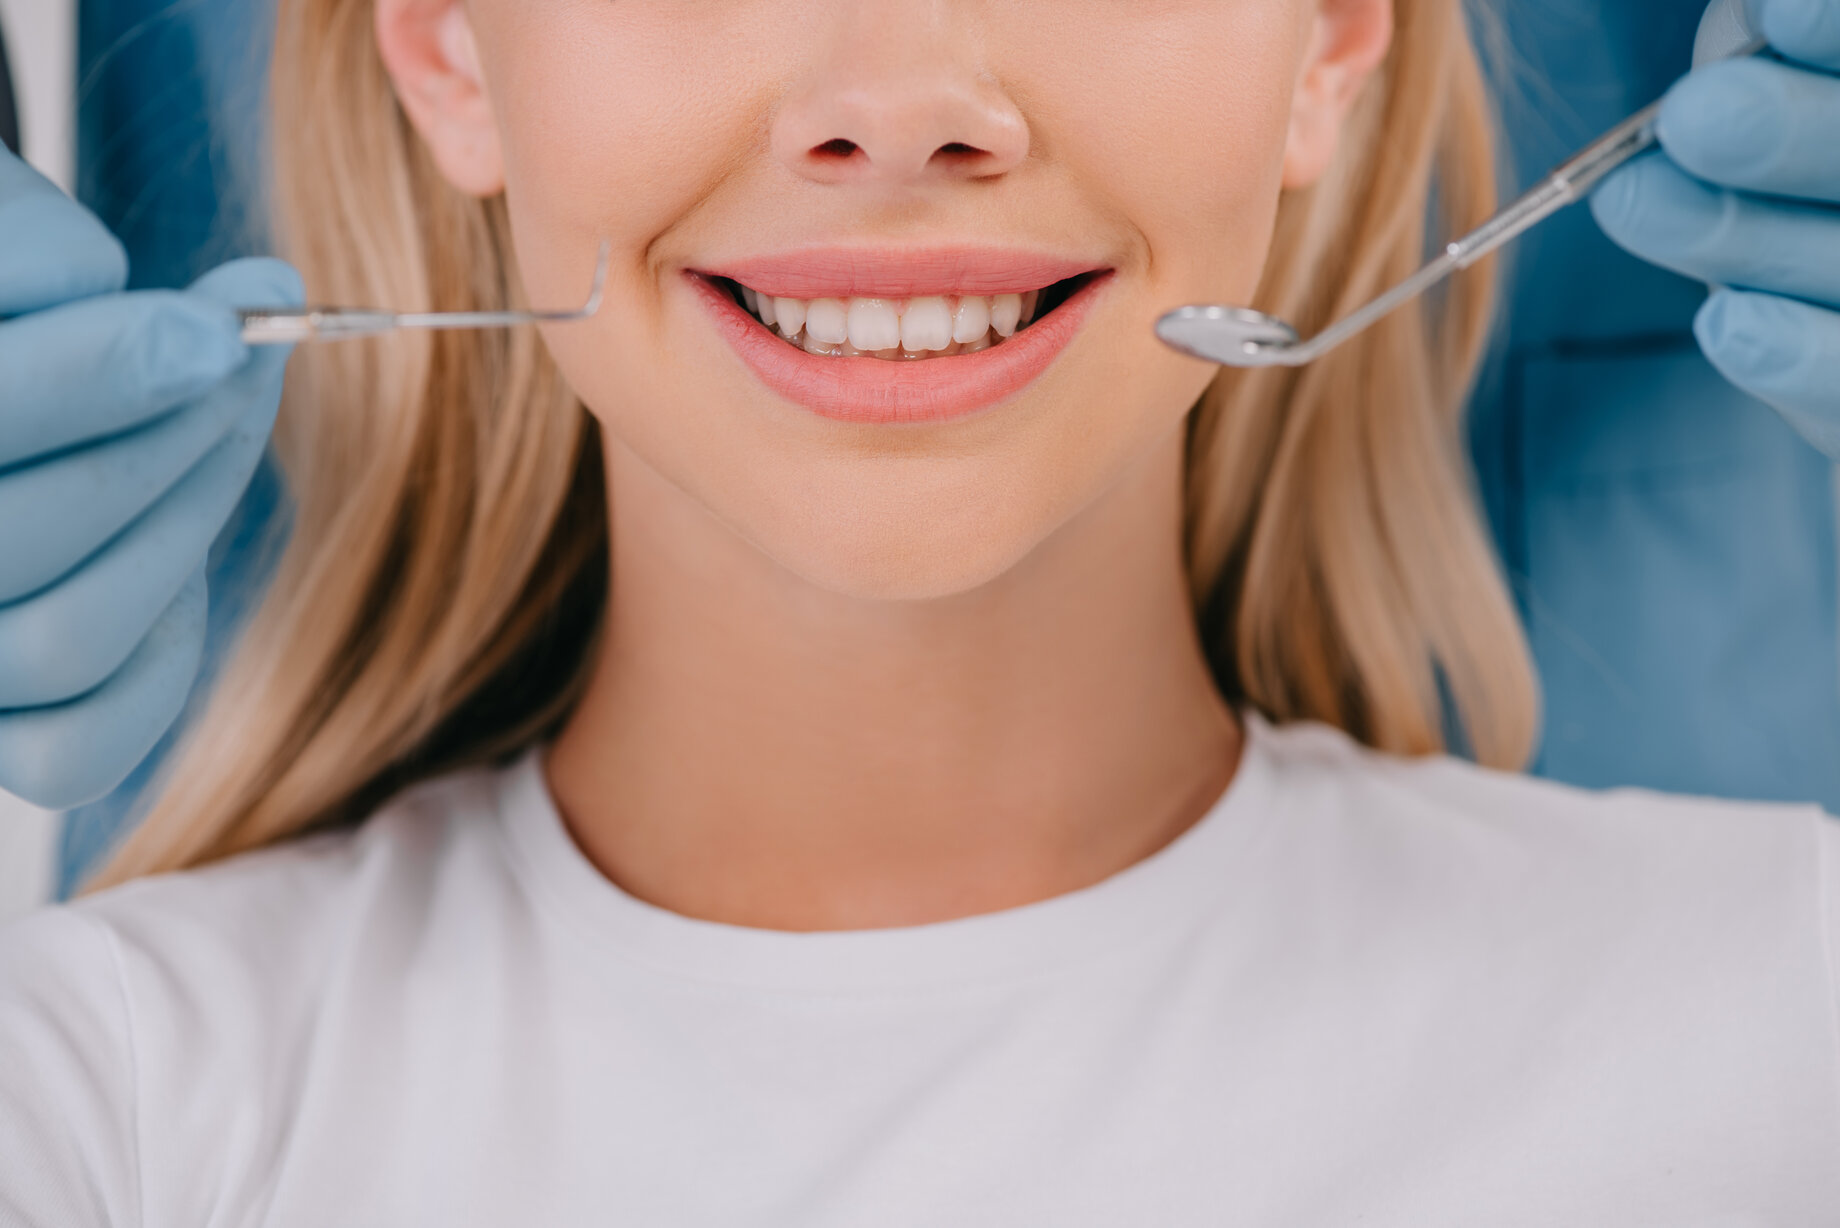 cropped view of dentist holding mouth mirror and dental probe near smiling woman